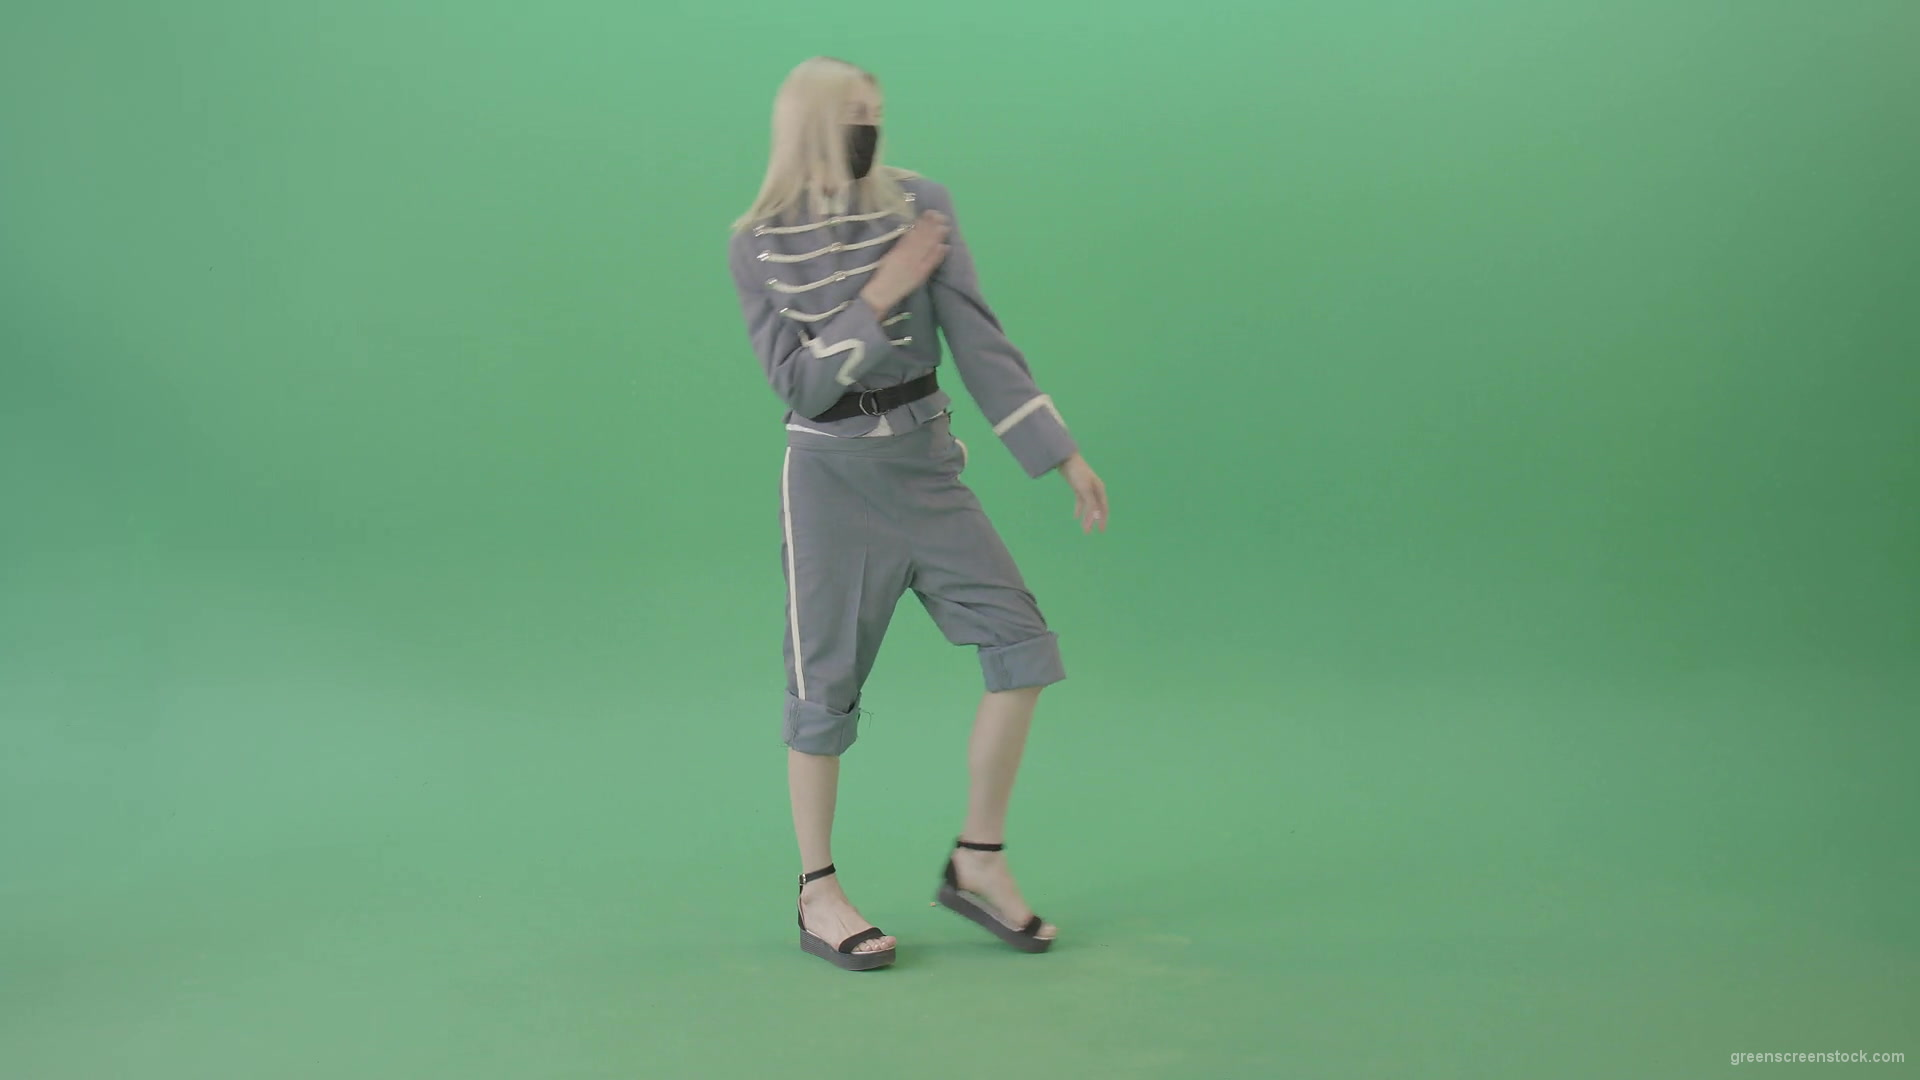 Blondie-in-Techno-royal-costume-dancing-house-in-black-covid19-mask-on-green-screen-4K-Video-Footage-1920_009 Green Screen Stock